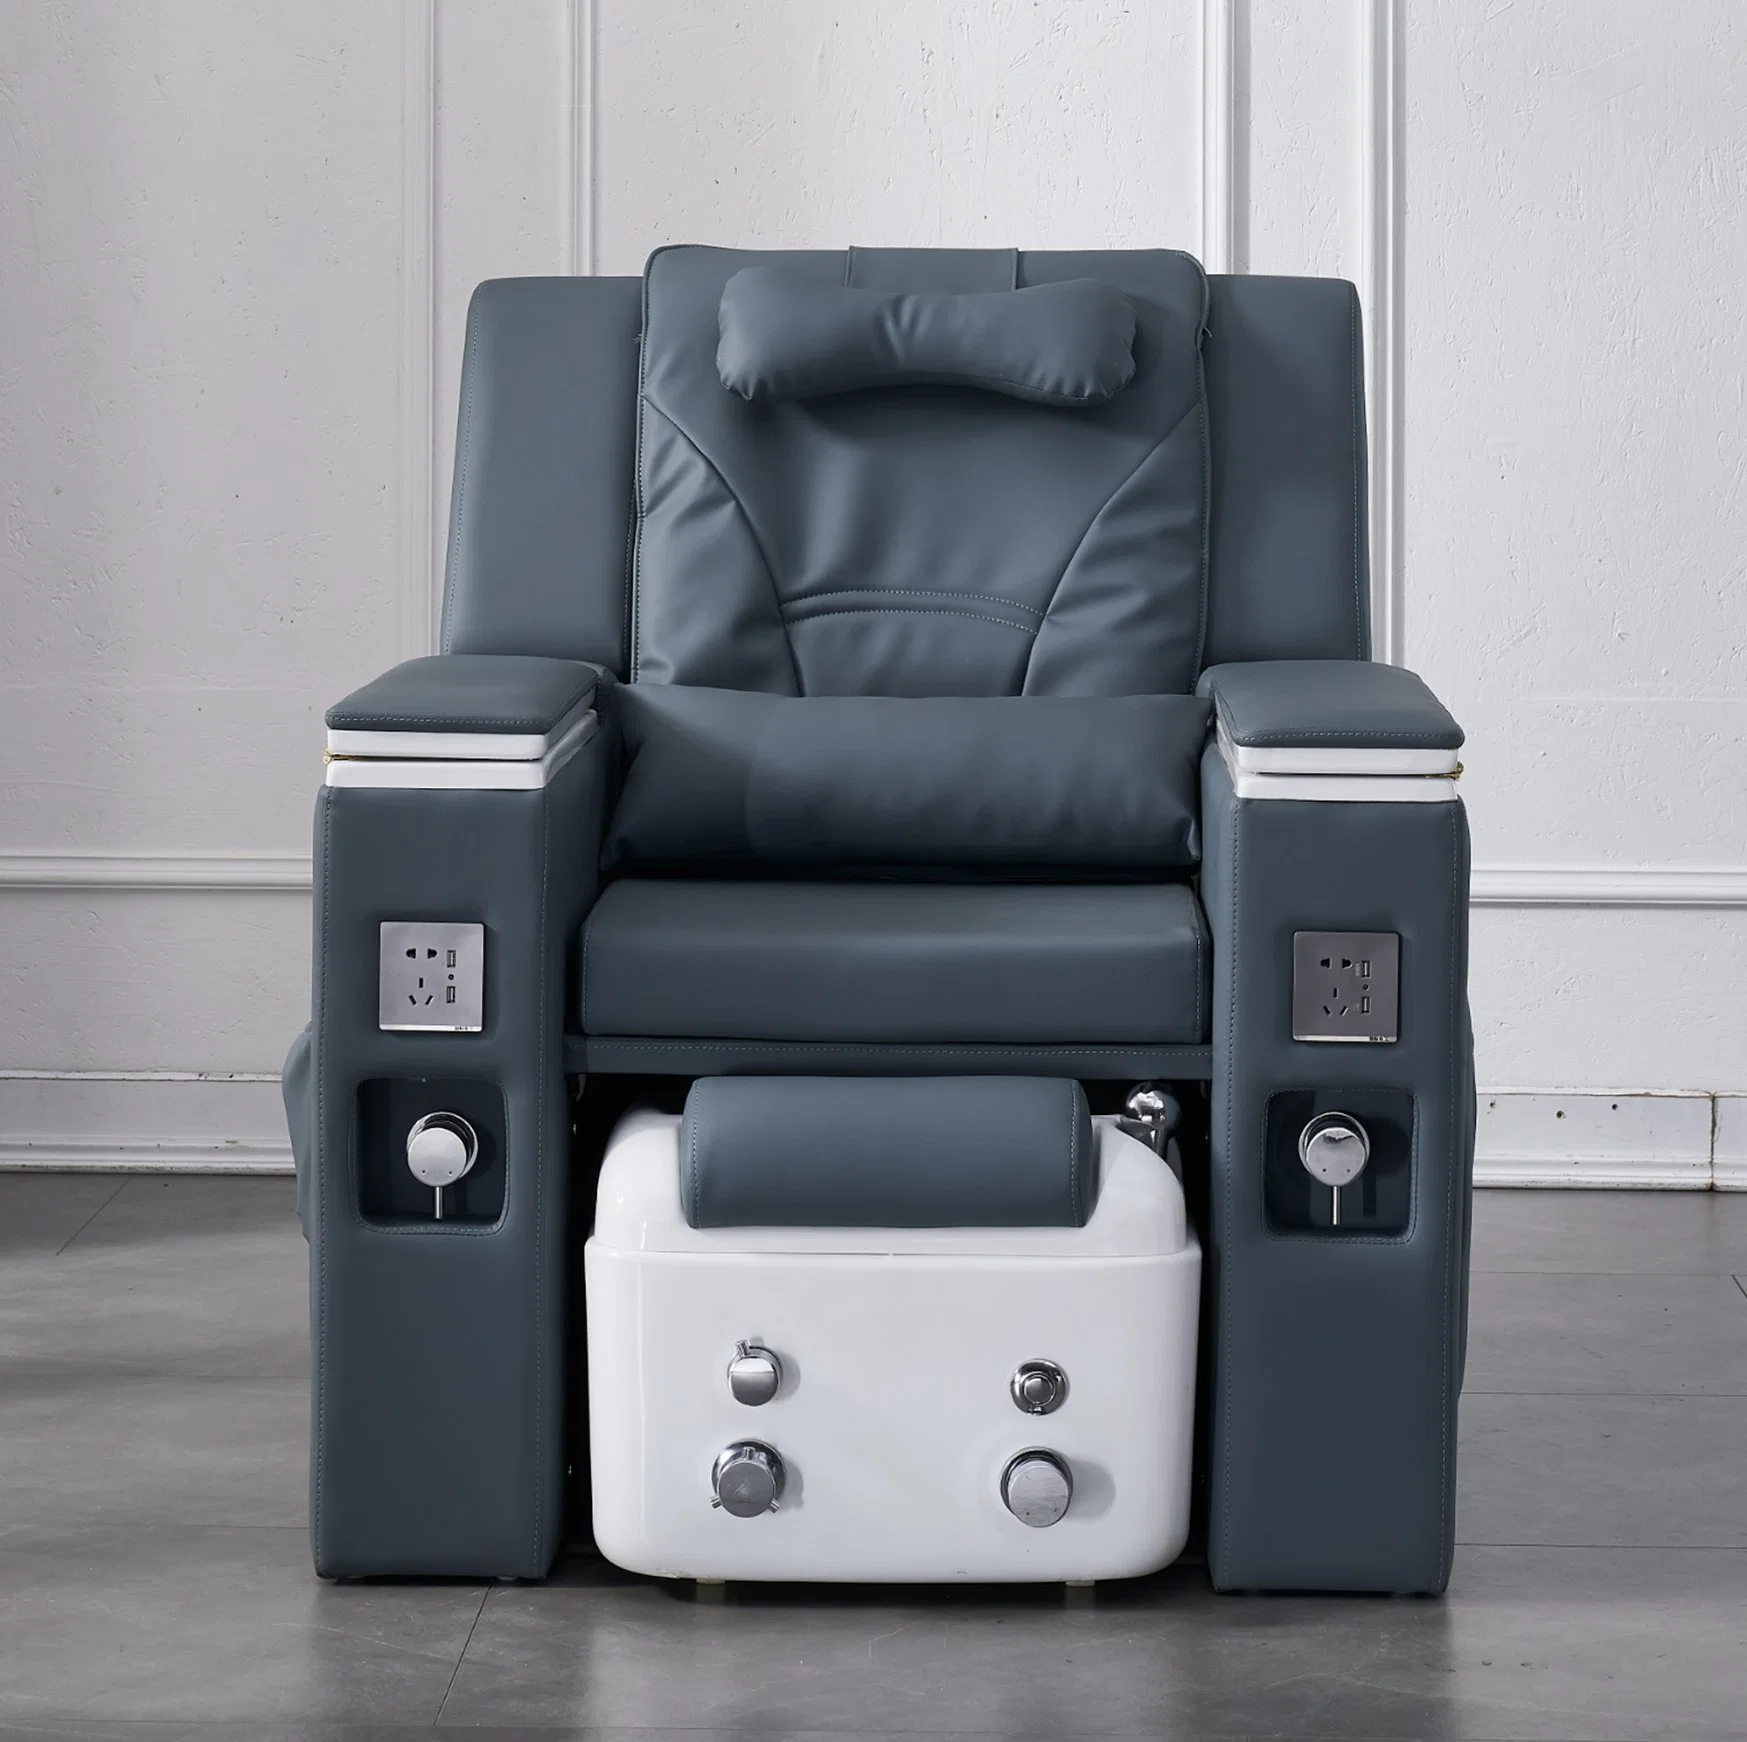 Foot Bath Massage Chairs Electric Foot Wash Sofa Beauty Therapy Chair Luxury SPA Pedicure Chair